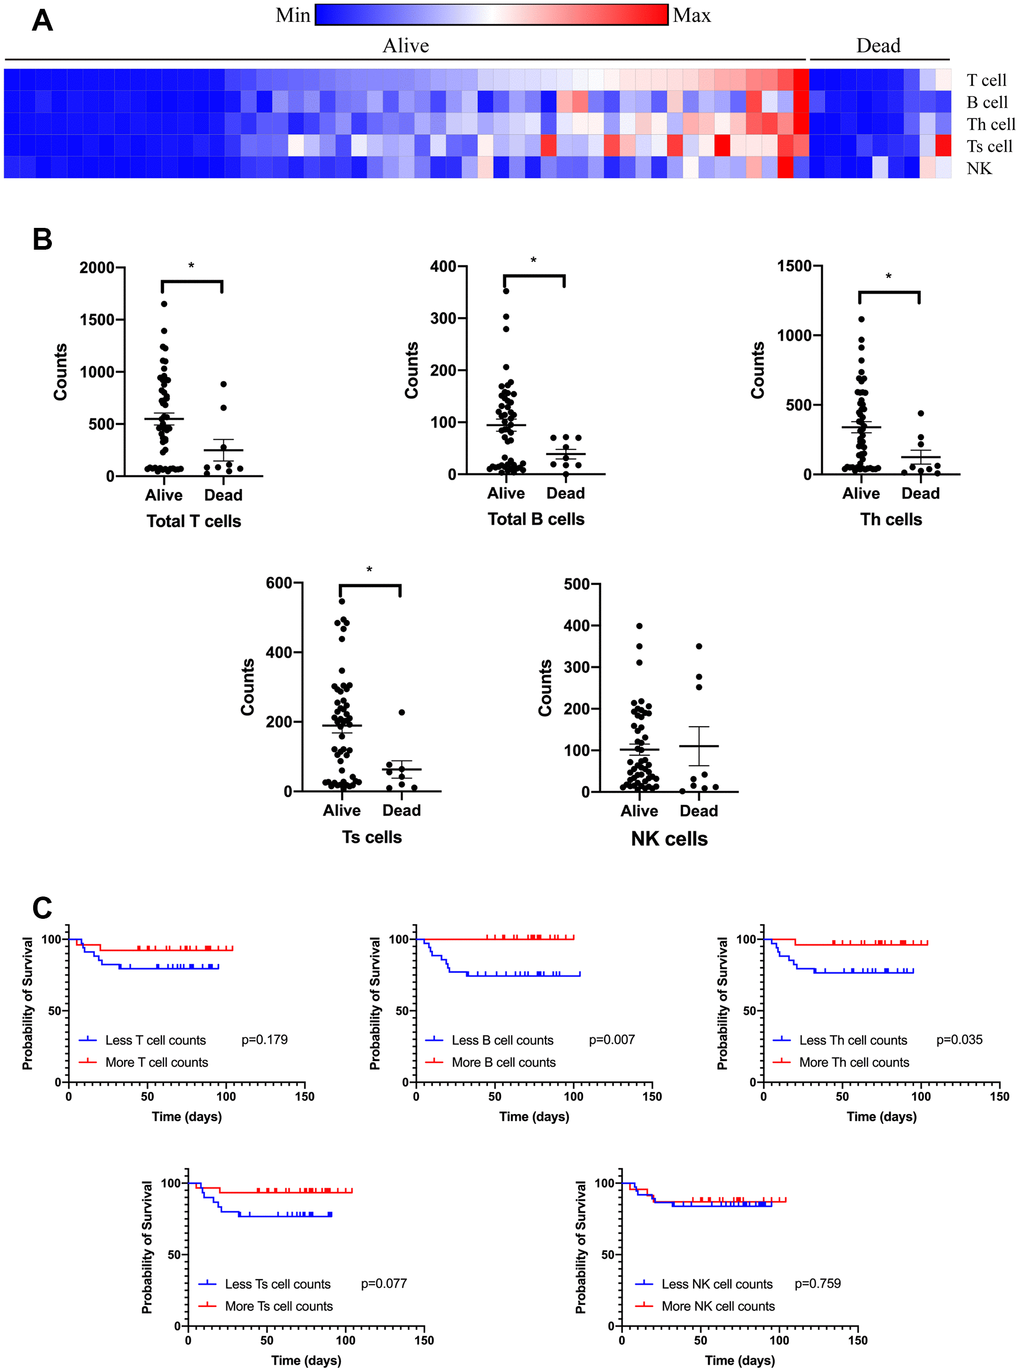 Circulating immune cell subpopulation on admission of cancer patients with COVID-19. Counts of T lymphocytes, B lymphocytes, Th cells, Ts cells, and NK cells were tested on admission of cancer patients with COVID-19 divided by the outcome (A). Counts of T lymphocytes, B lymphocytes, Th cells, and Ts cells were diminished on admission of cancer patients with COVID-19 (B). Count of B lymphocytes and Th cells were correlated with survival time of cancer patients with COVID-19 (C).